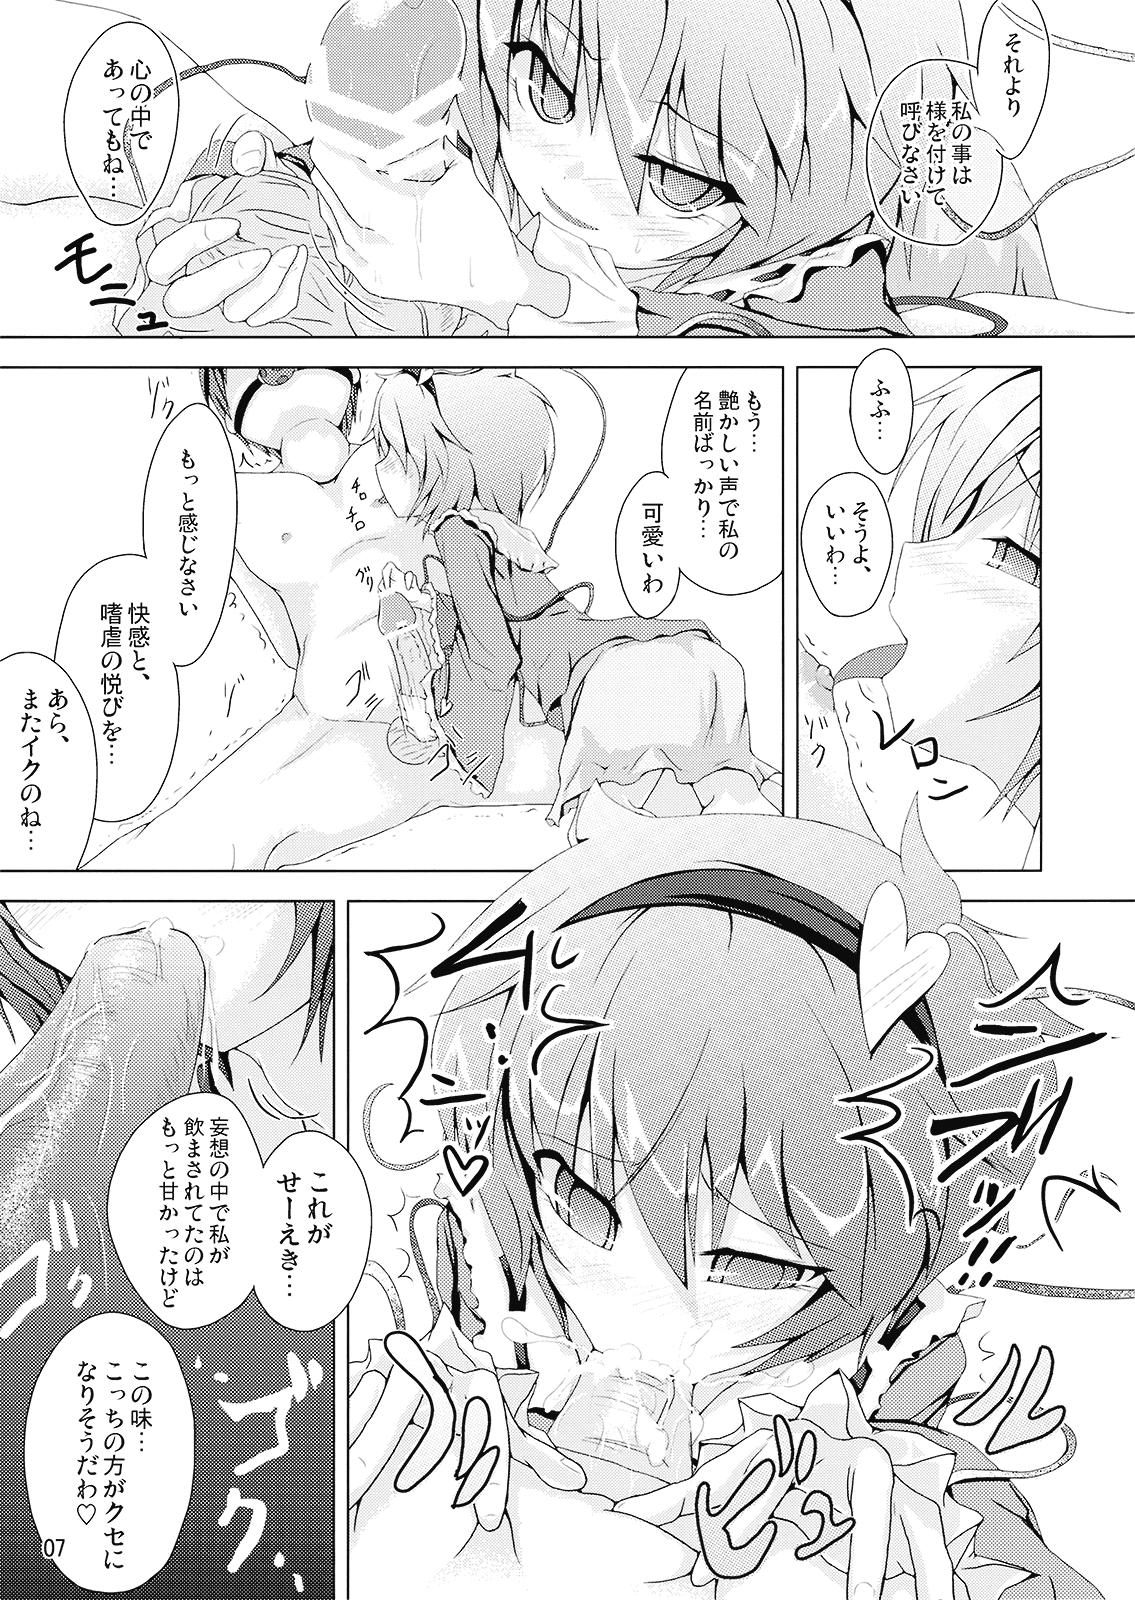 Teentube Satorare Ijirare - Touhou project Tight Pussy - Page 7